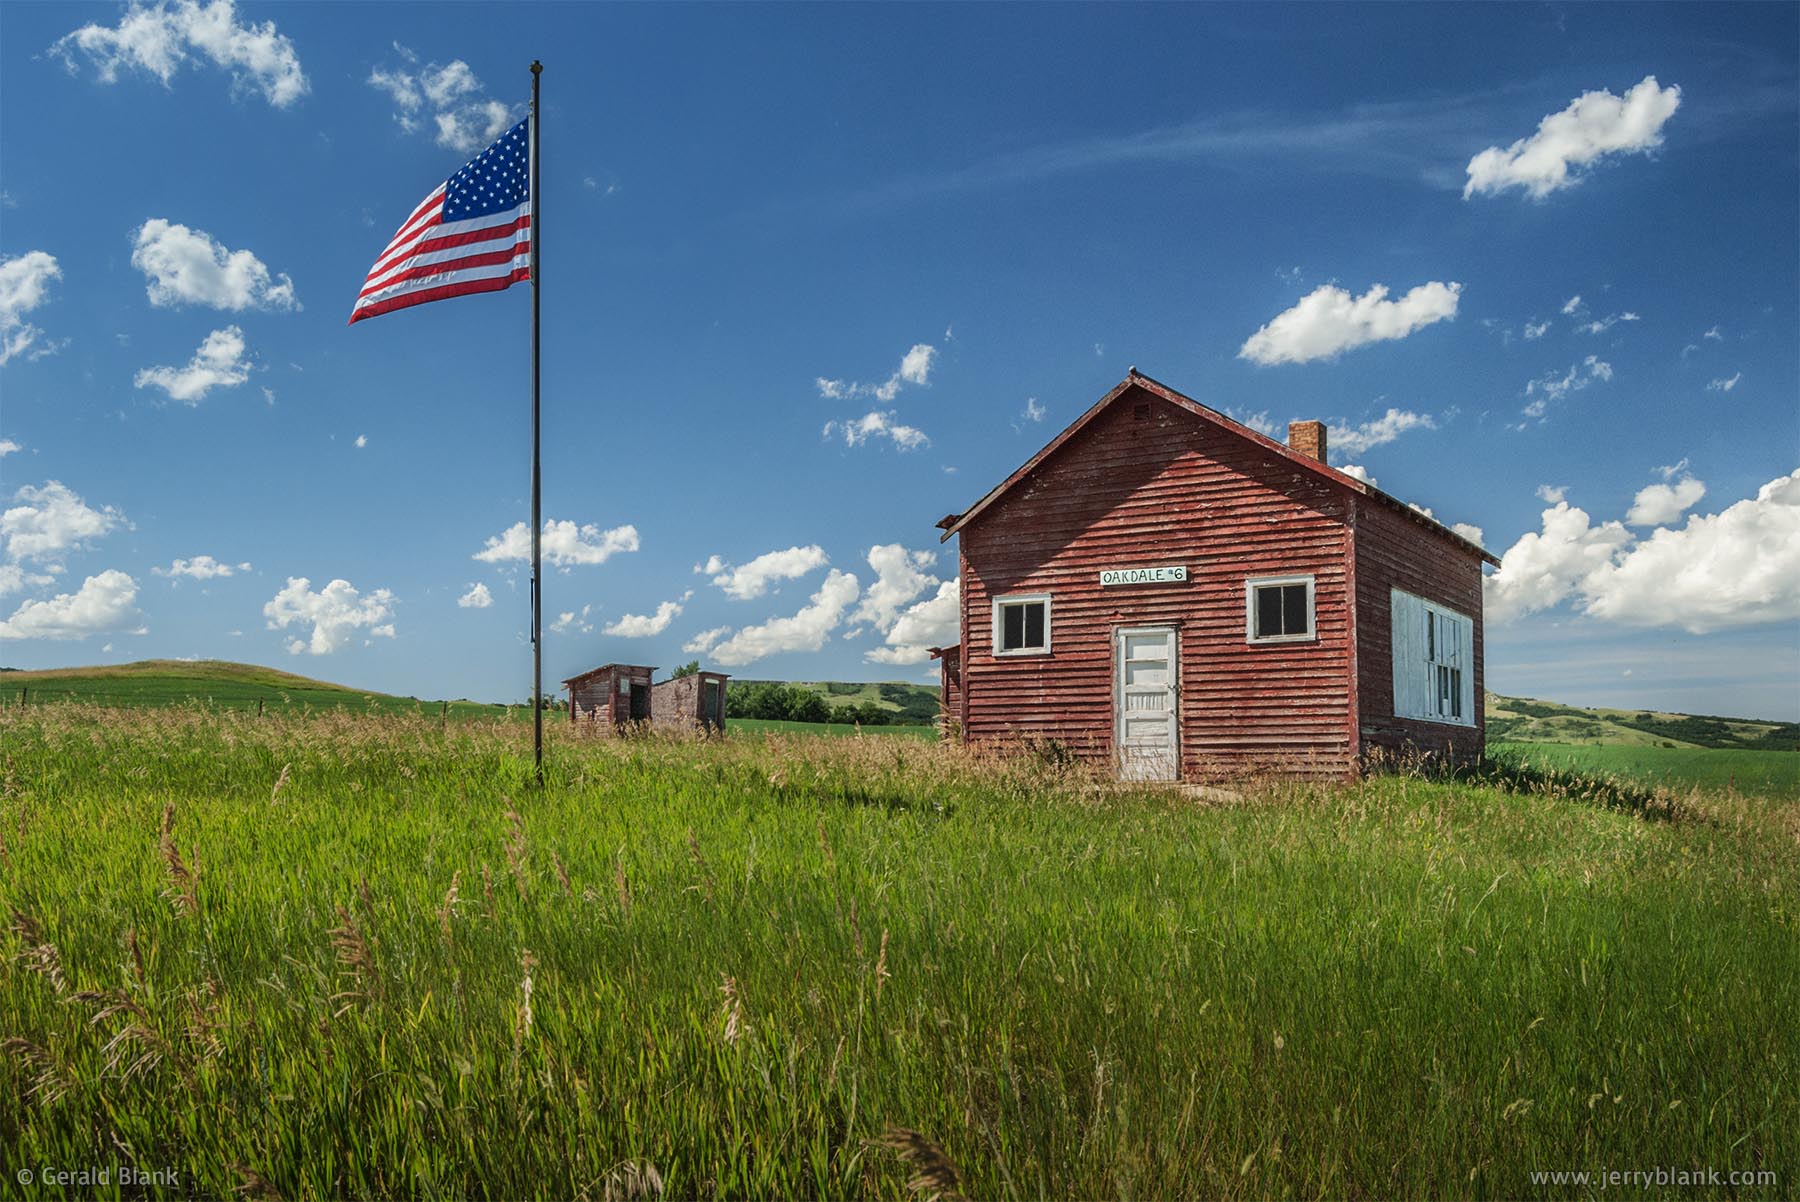 #01028 - On Independence Day, the U.S. flag is raised at the historic Oakdale School building in Dunn County, North Dakota - photo by Jerry Blank